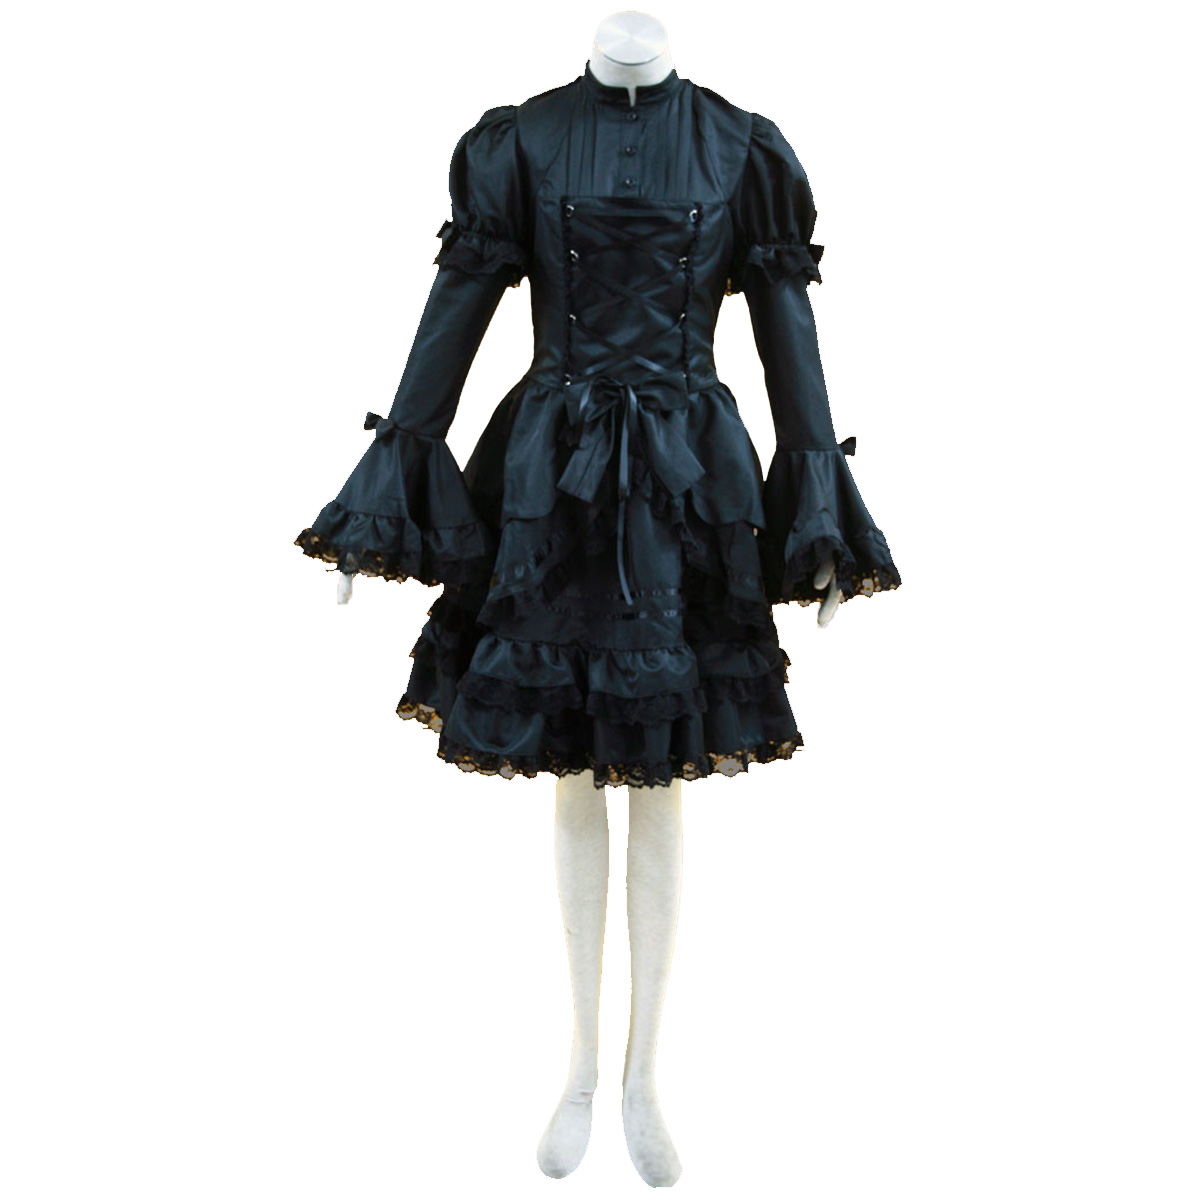 Deluxe Lolita Culture Black and White Sleeveless Short Dresses Cosplay